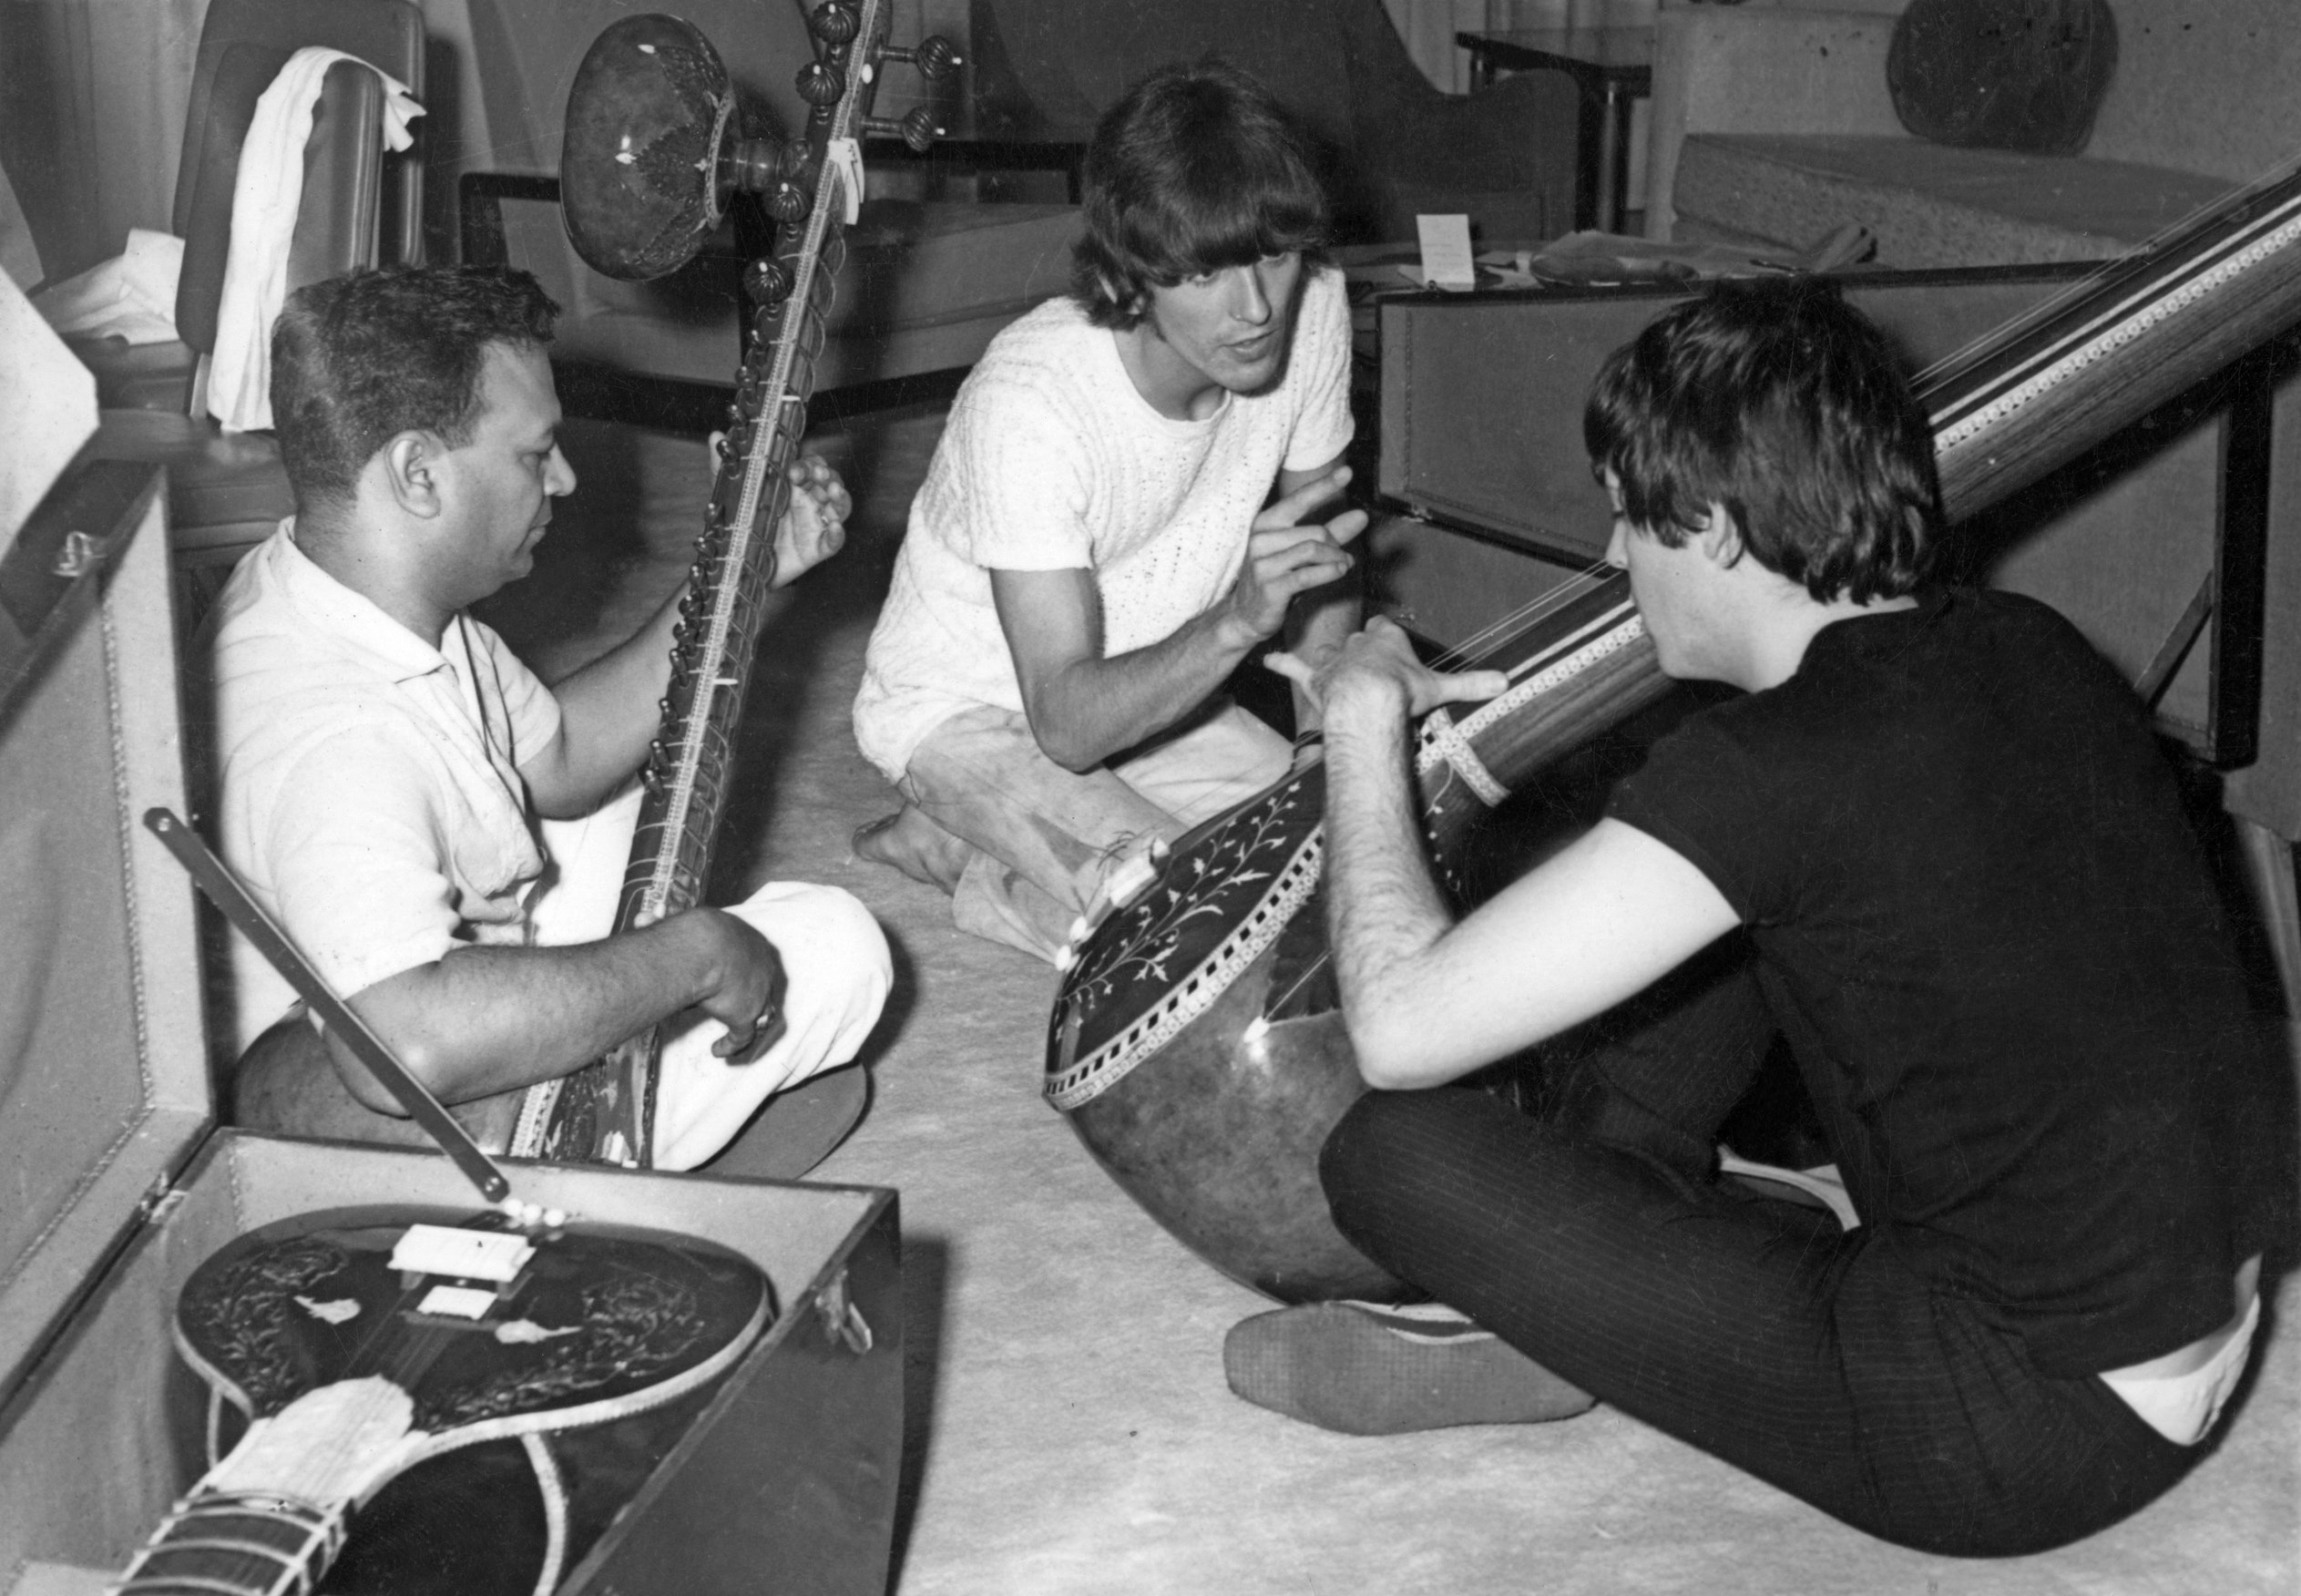 George Harrison and Paul McCartney are given a sitar demonstration in India